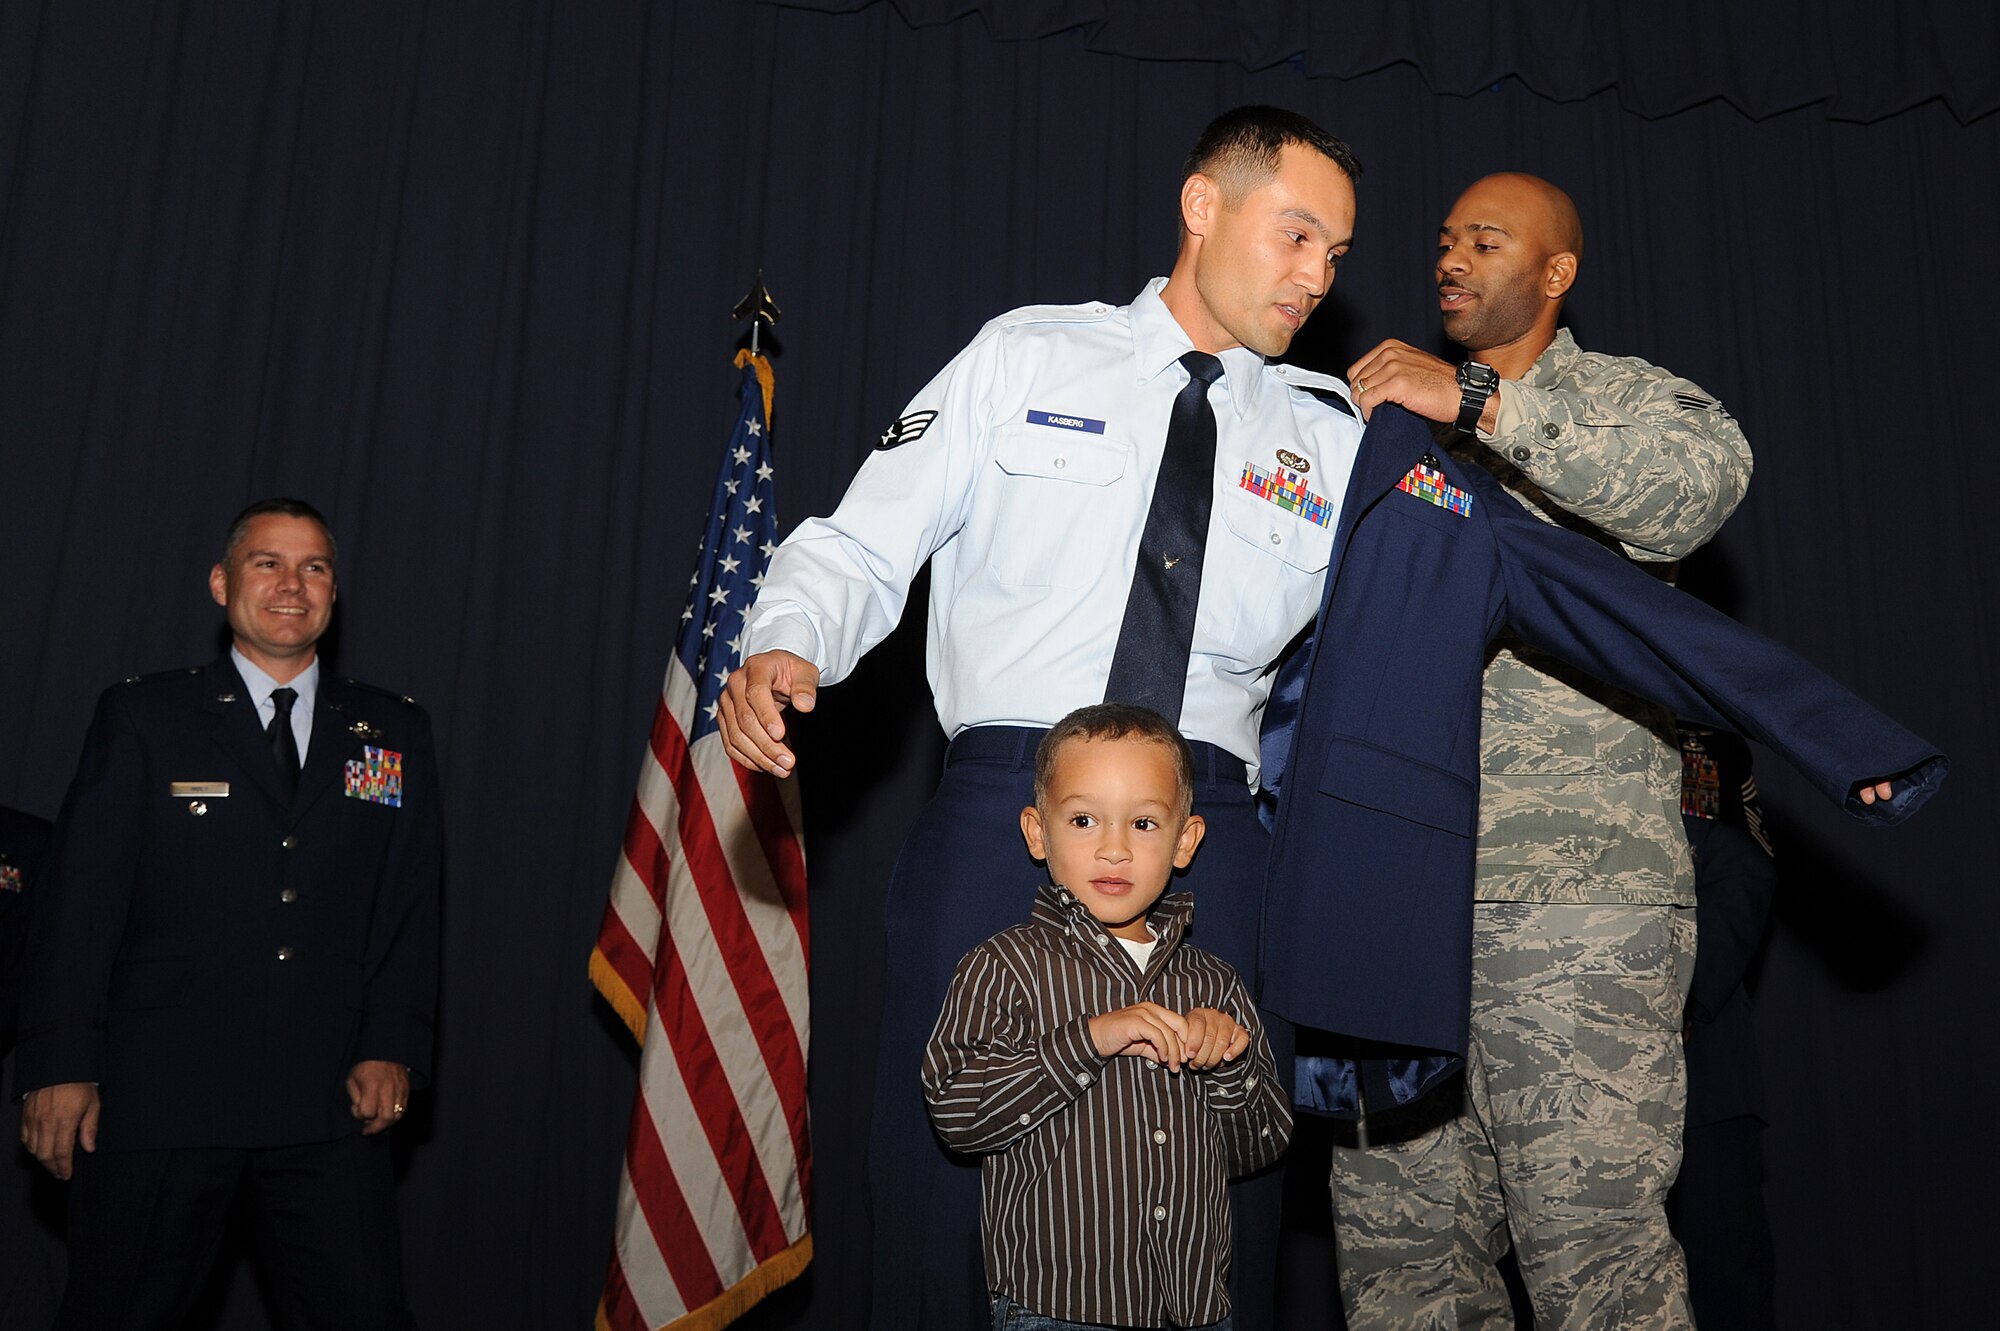 U.S. Air Force Staff Sgt. Eric Kasberg, a services specialist with 1st Special Operations Force Support Squadron, dons his new staff sergeant stripes for the first time during an NCO recognition ceremony at the King Auditorium on Hurlburt Field, Fla., Oct. 30, 2012. Both his co-worker and his son, Riley, punched Kasberg’s new stripes as part of an NCO tradition. (U.S. Air Force Photo/Airman 1st Class Michelle Vickers)